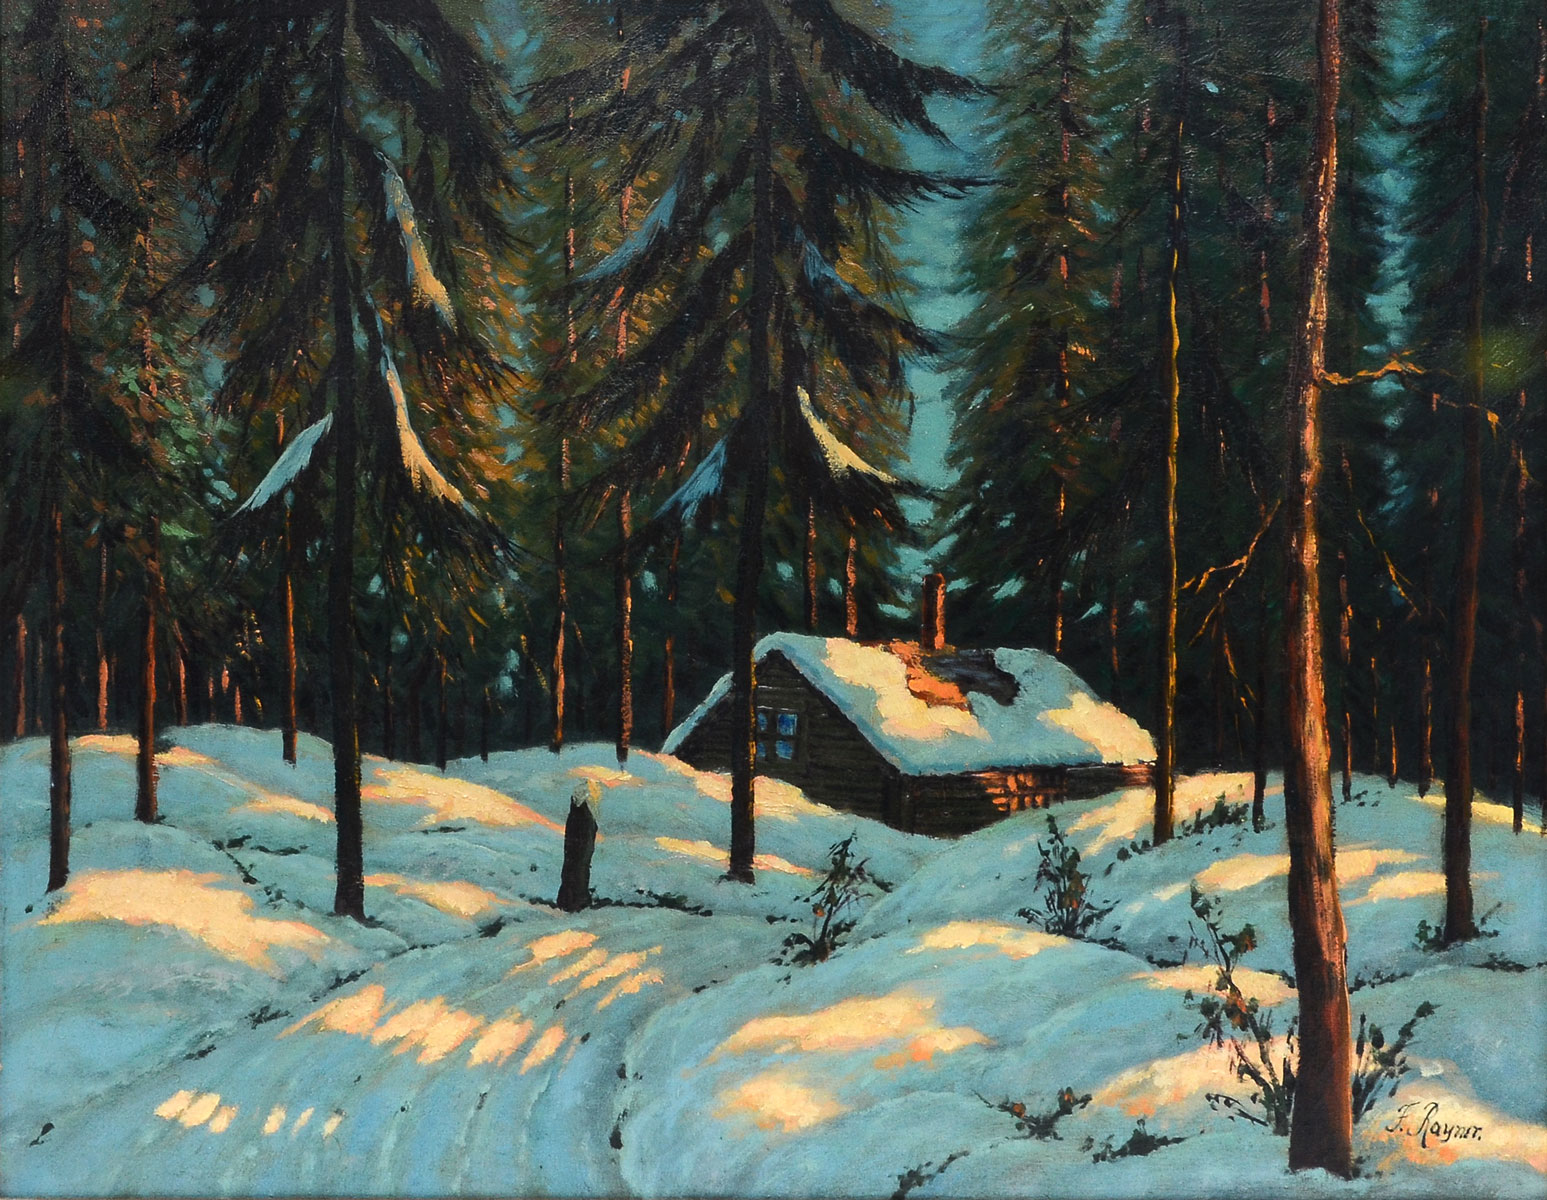 F. RAYNER CABIN IN THE SNOW PAINTING: